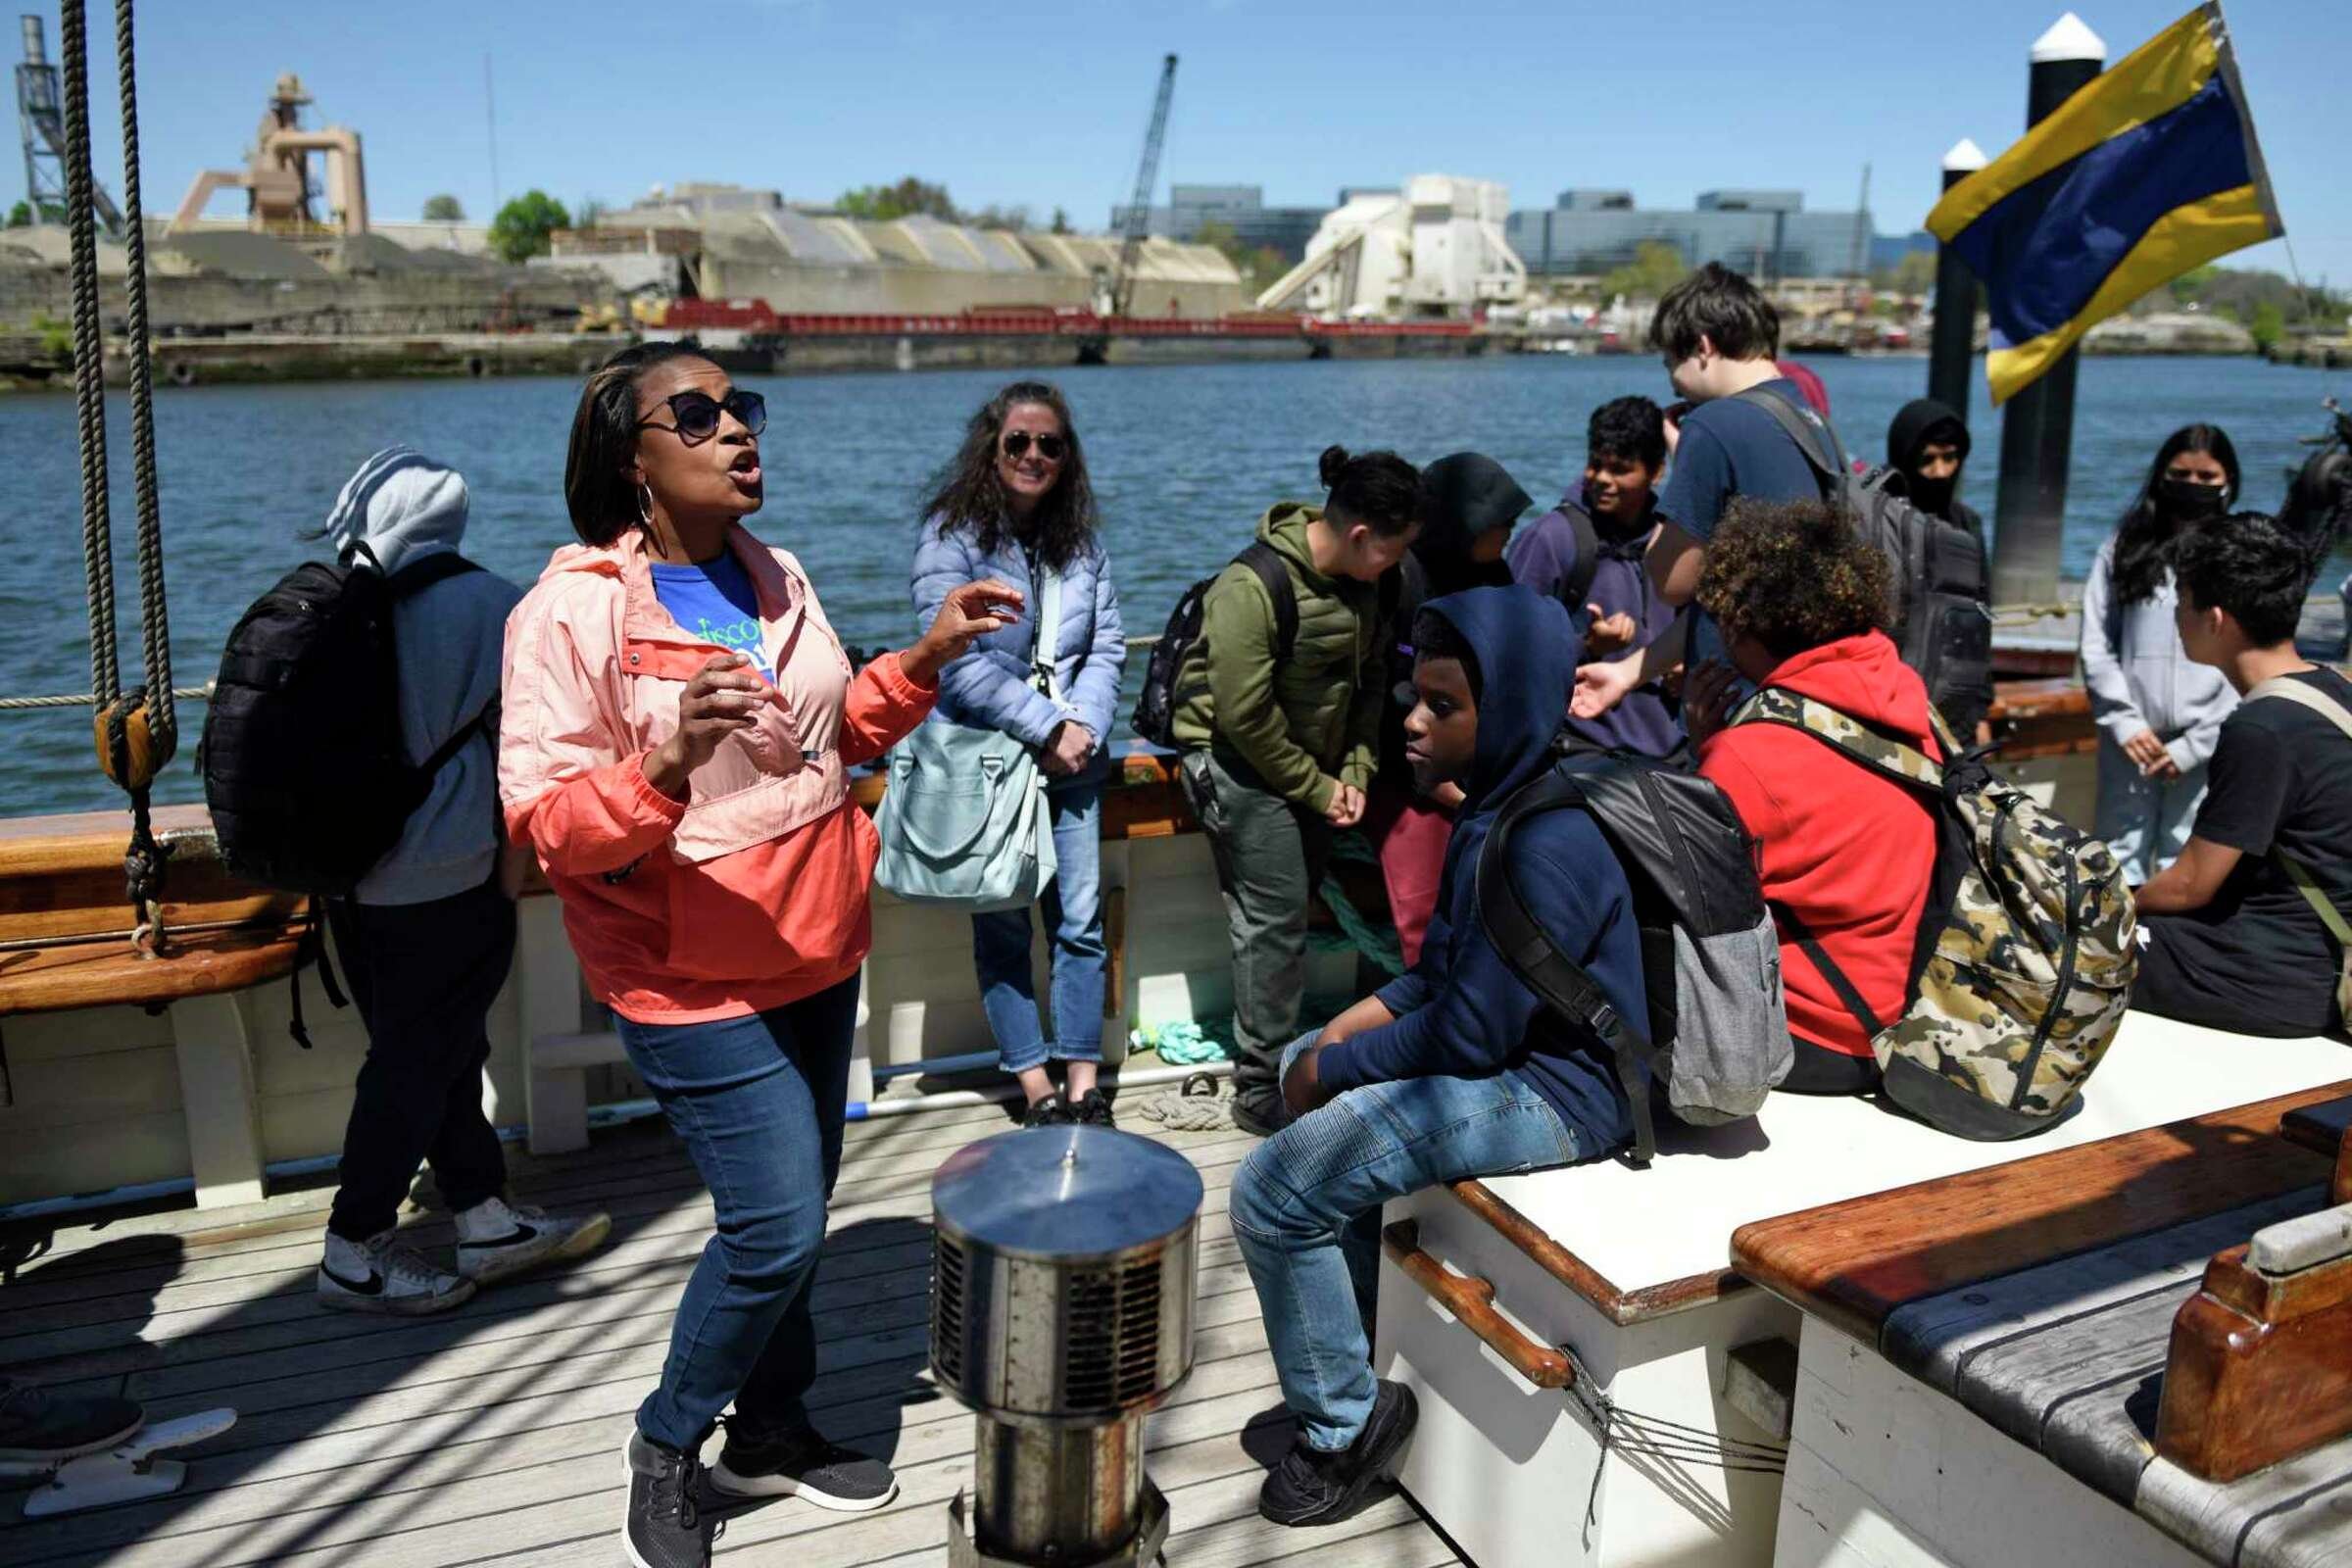  Discover Amistad educator Reeshemah Nofleet tells students the history of the Amistad uprising aboard a reproduction of the ship docked at Harbor Point in Stamford, Conn. Monday, May 9, 2022. Eighth grade students toured the ship to kick off the new